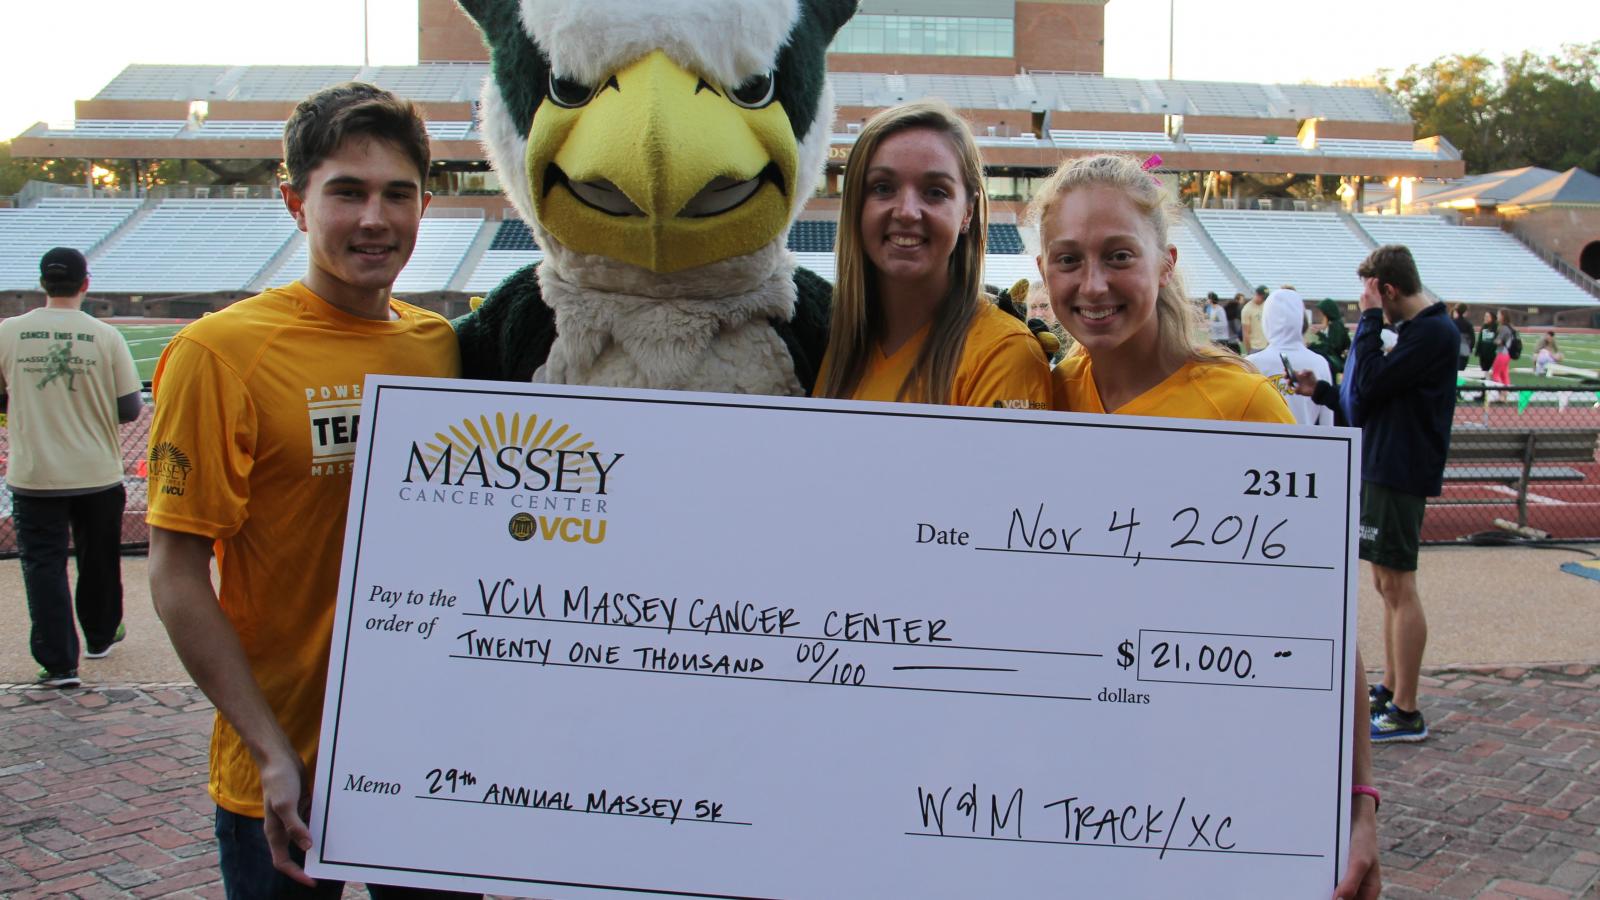 Members of the W&M track team hold a check from the 2016 Massey Cancer Center 5K.